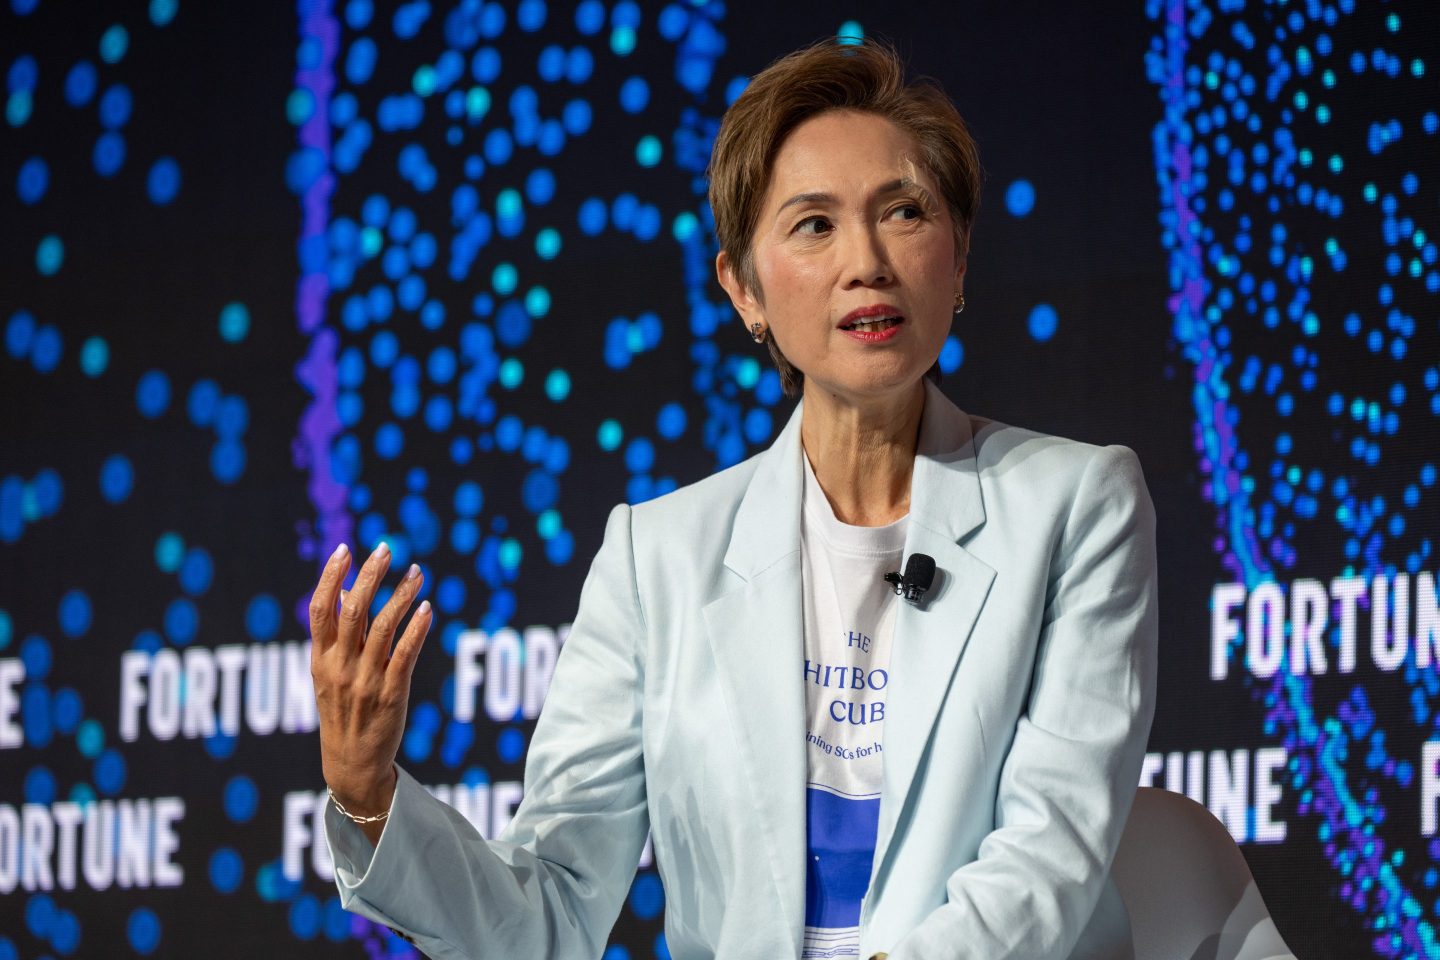 Josephine Teo, Singapore’s minister for digital development and information, shared why the country is well-placed to take advantage of AI at the Fortune Brainstorm AI Singapore conference.